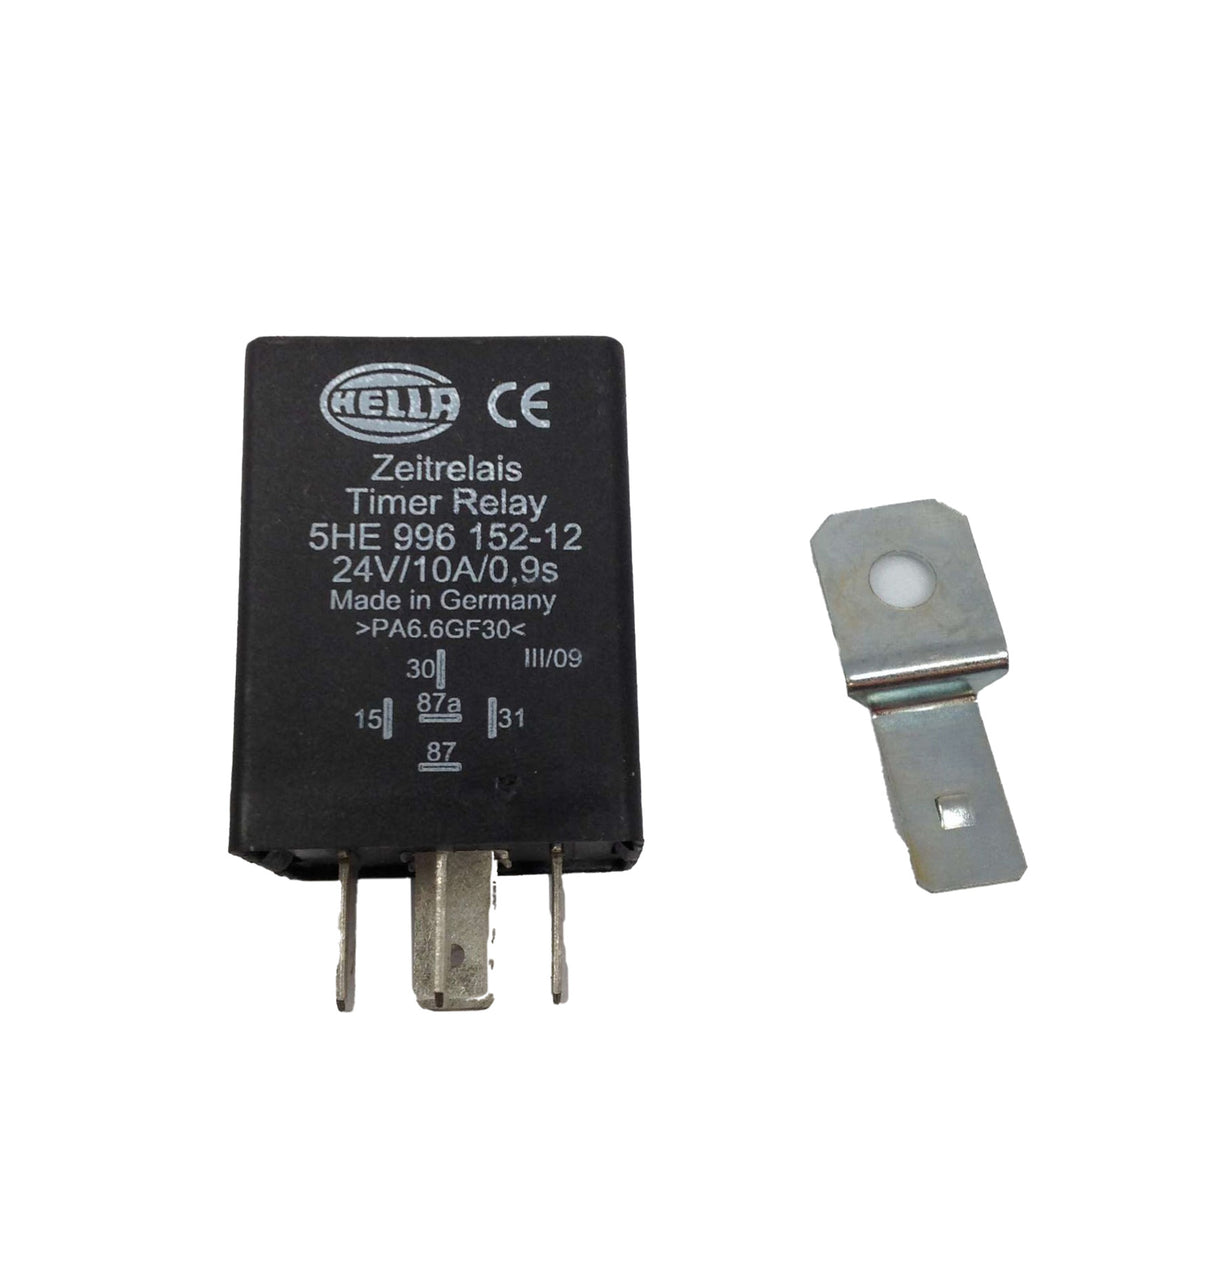 HELLA ­-­ 5HE-996-152-121 ­-­ TIMER RELAY 24V/10A/0.9S